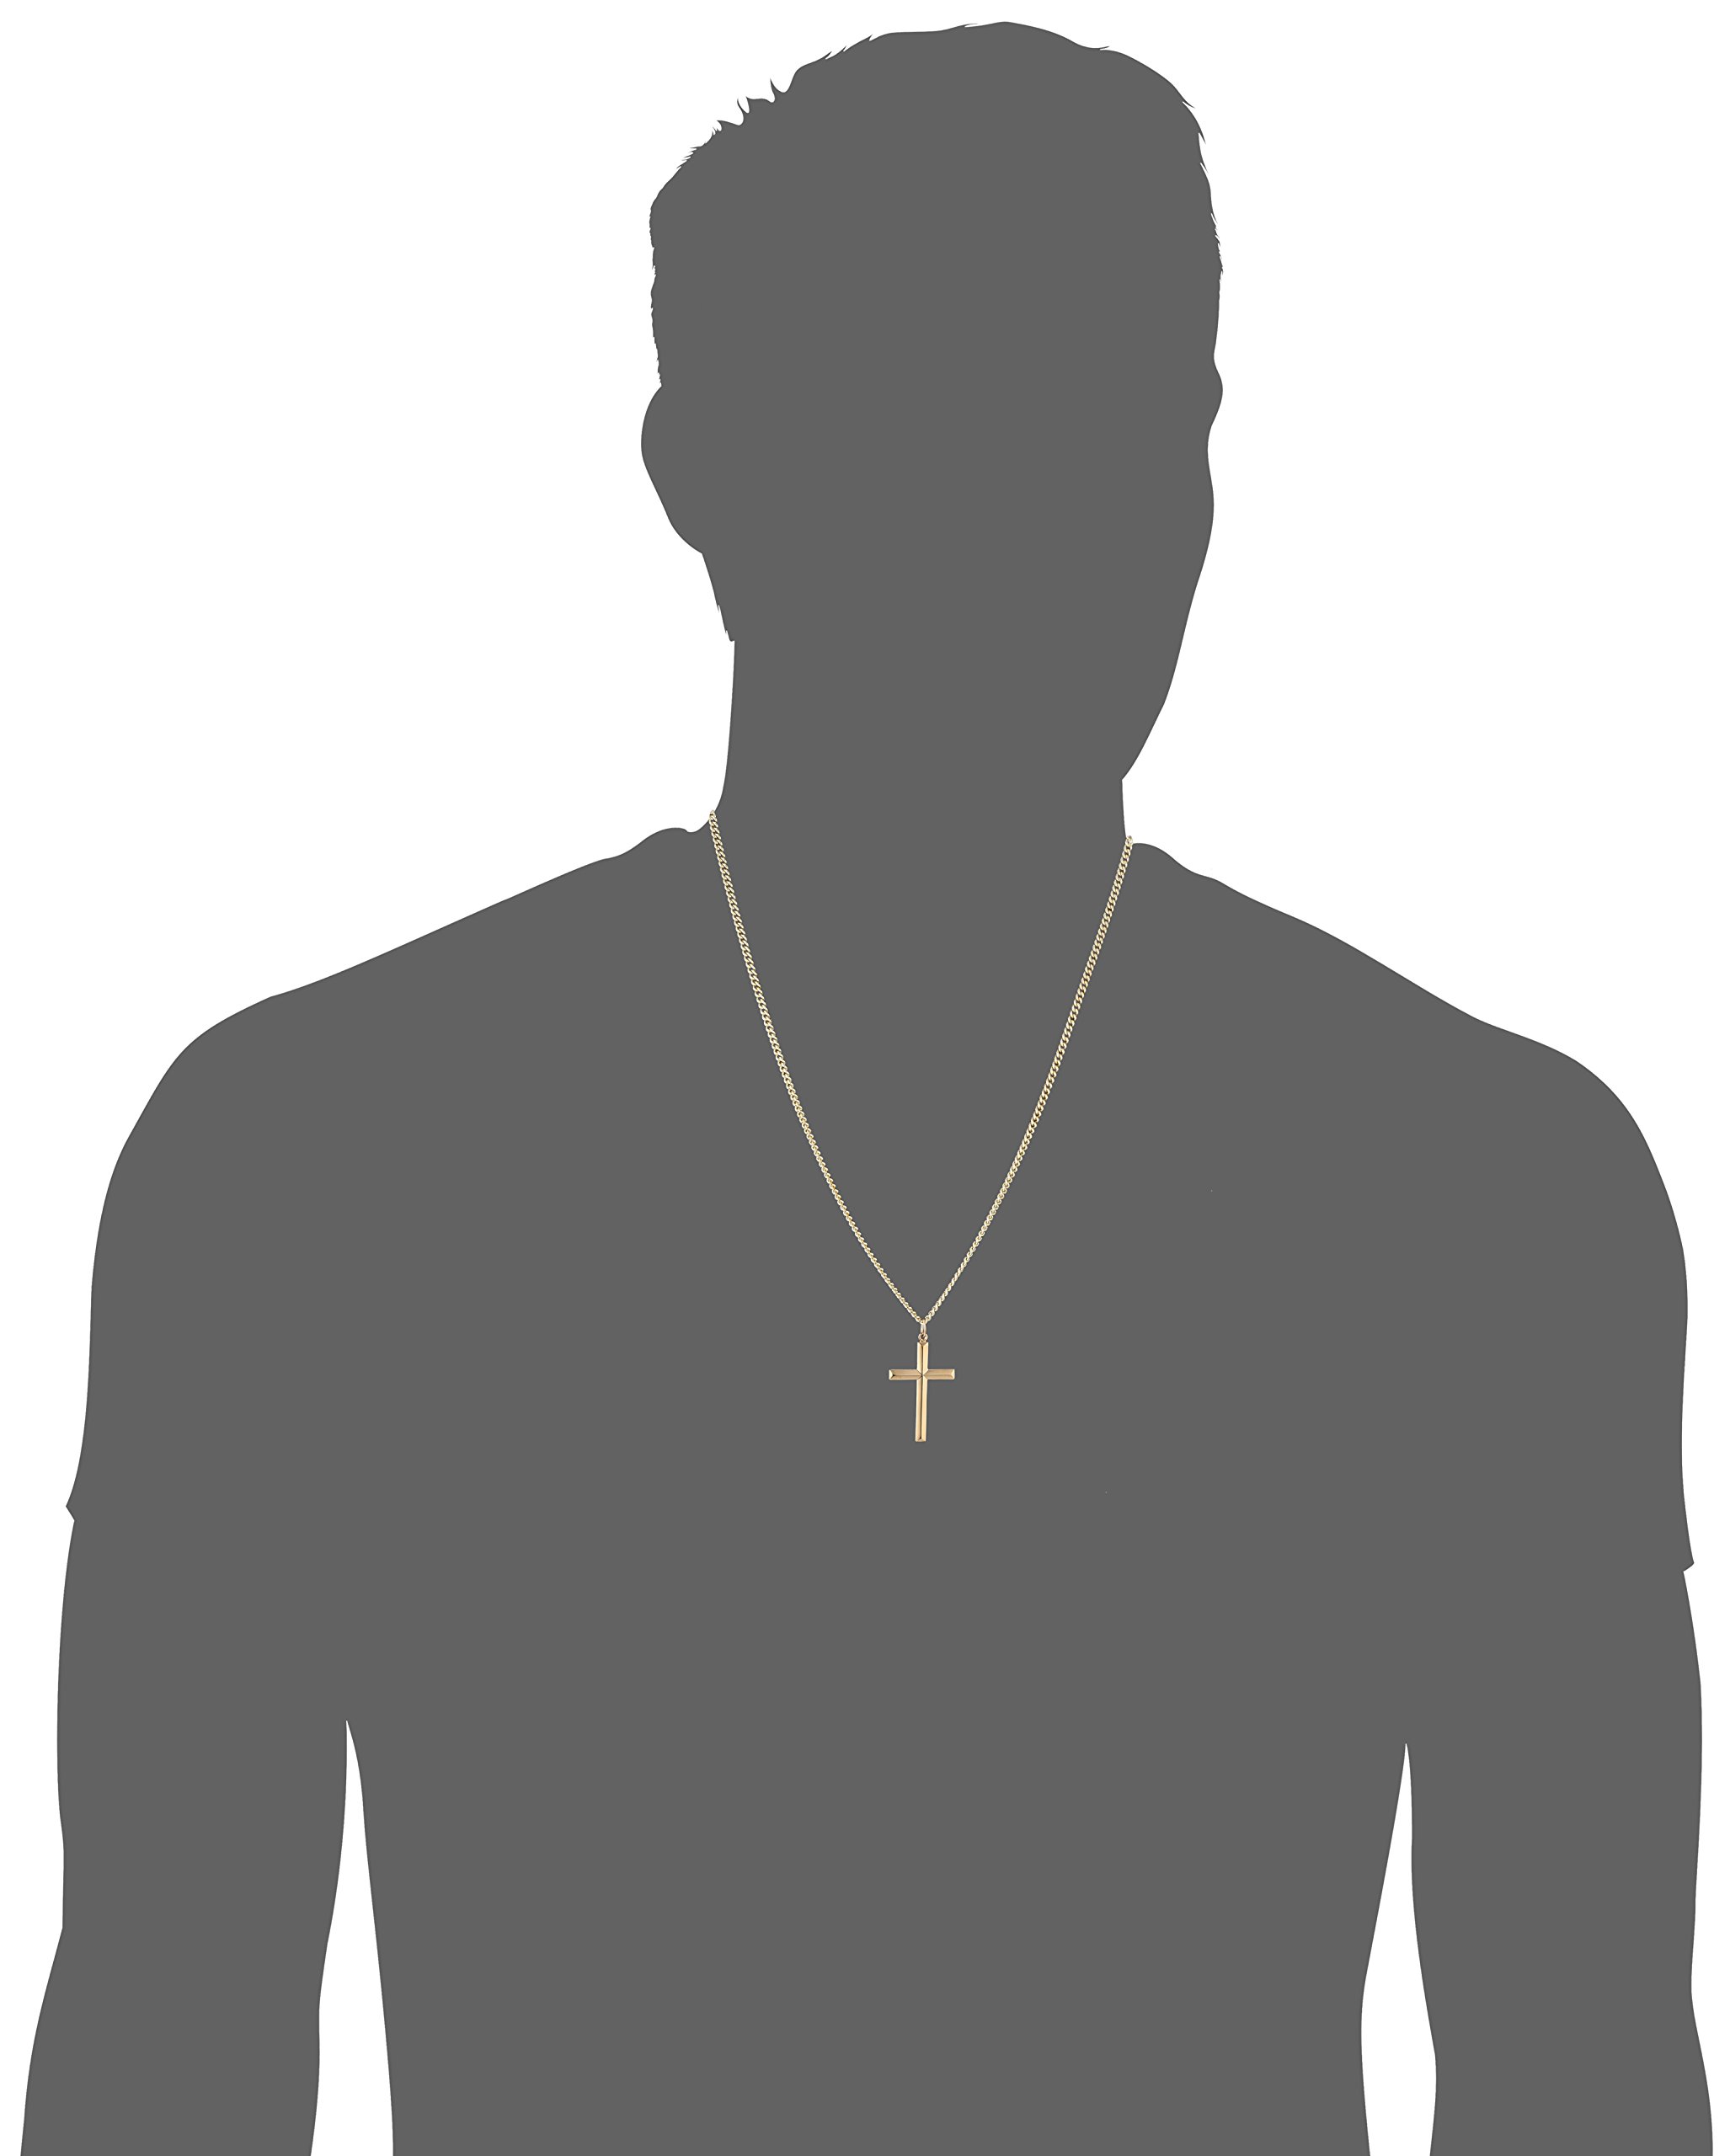 Men's 14k Gold Filled Solid Beveled Edge Embossed Cross with Gold Plated Stainless Steel Chain Pendant Necklace, 24